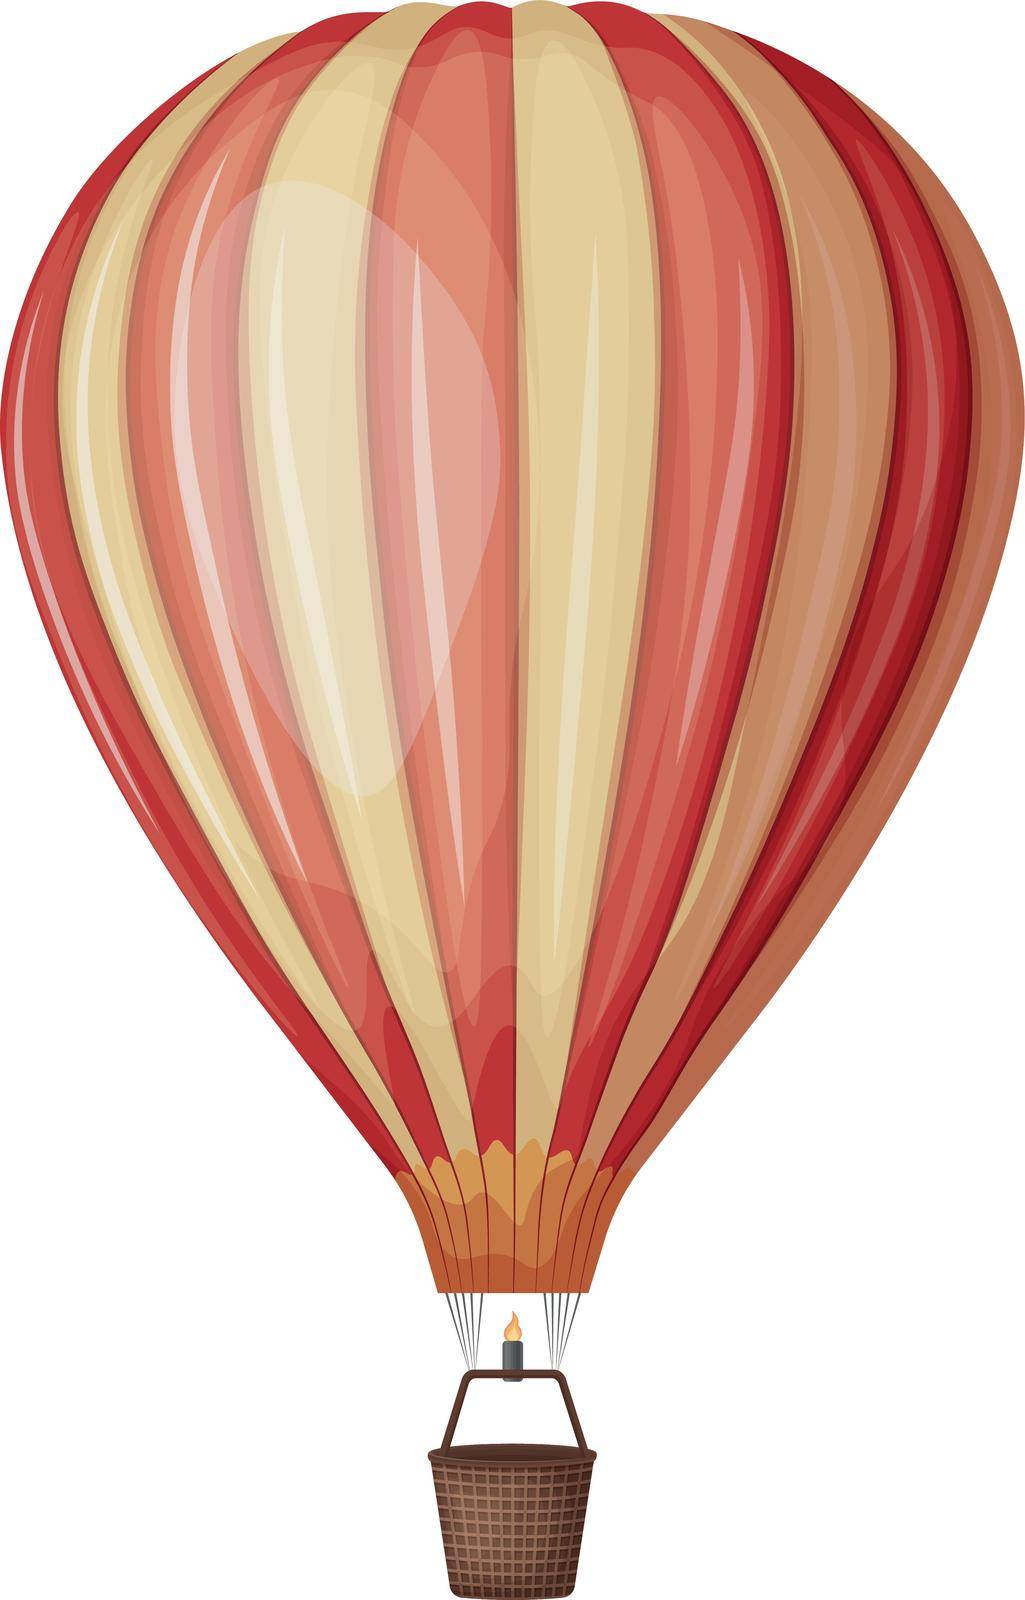 Air balloon. An image of a balloon for flying and traveling. Hot air balloon. Multicolored balloon. Vector illustration isolated on a white background.